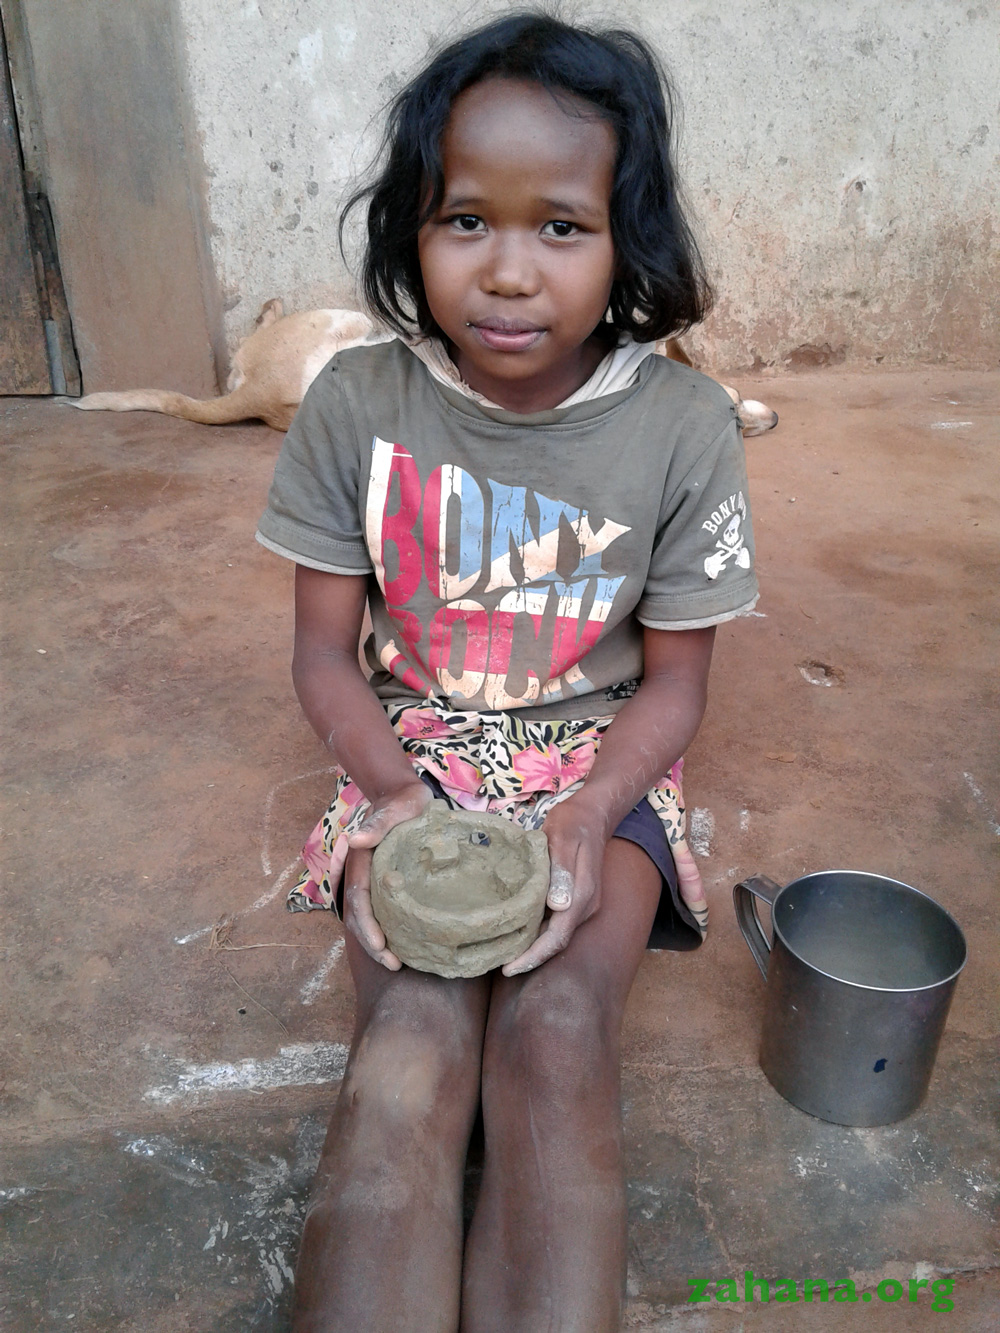 Improved cookstove in Madagascar as a toy - Zahana.org